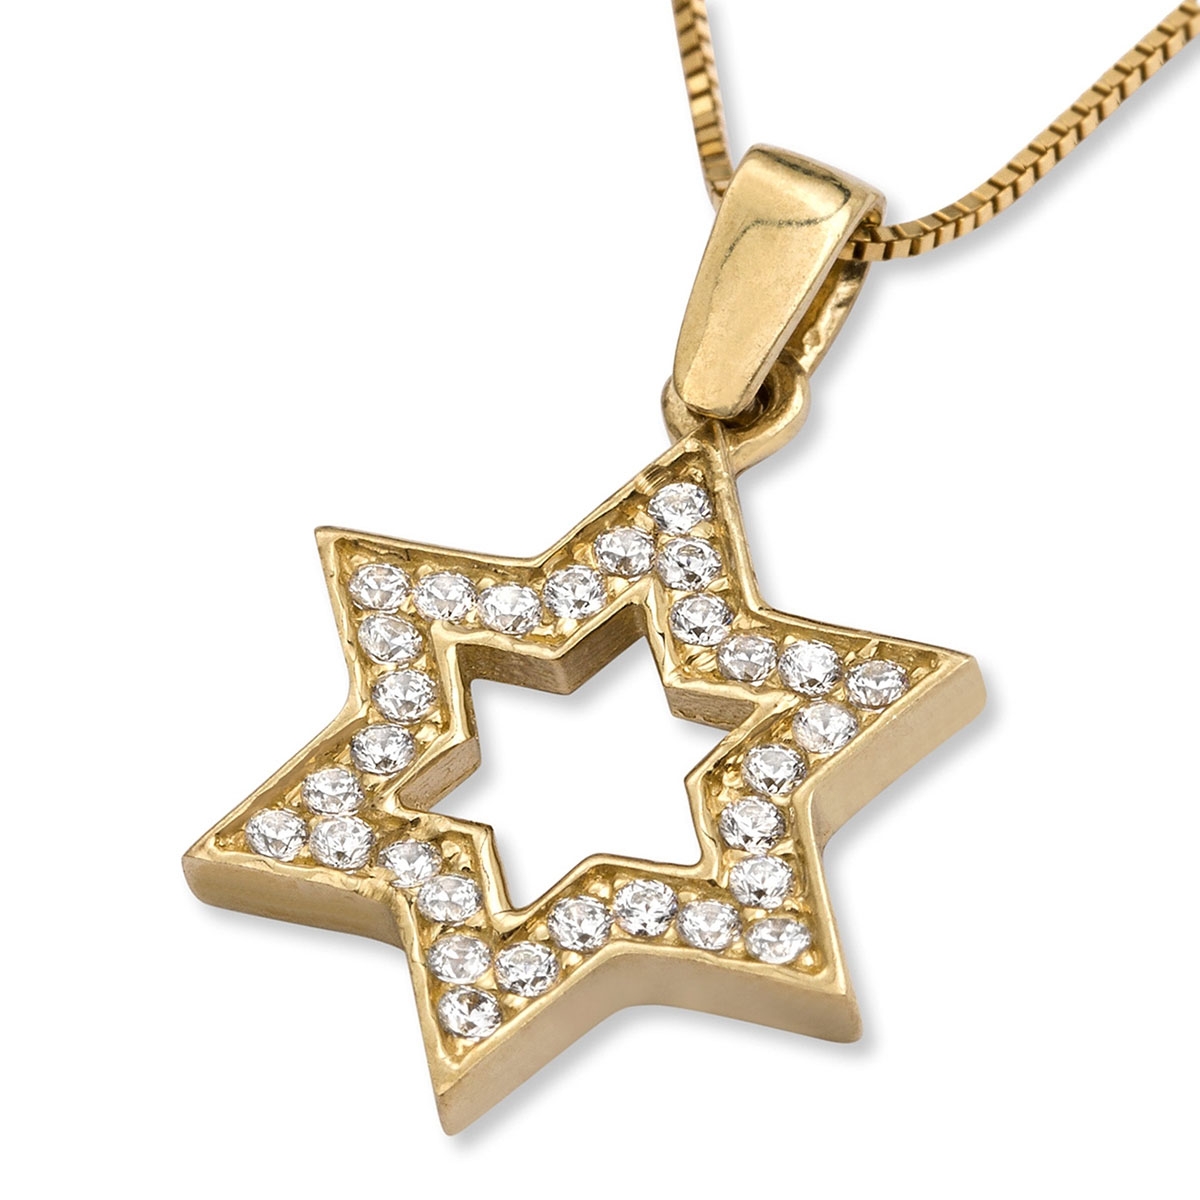 14K Yellow Gold Star of David Outline Pendant Necklace With Cubic Zirconia Stones - 1